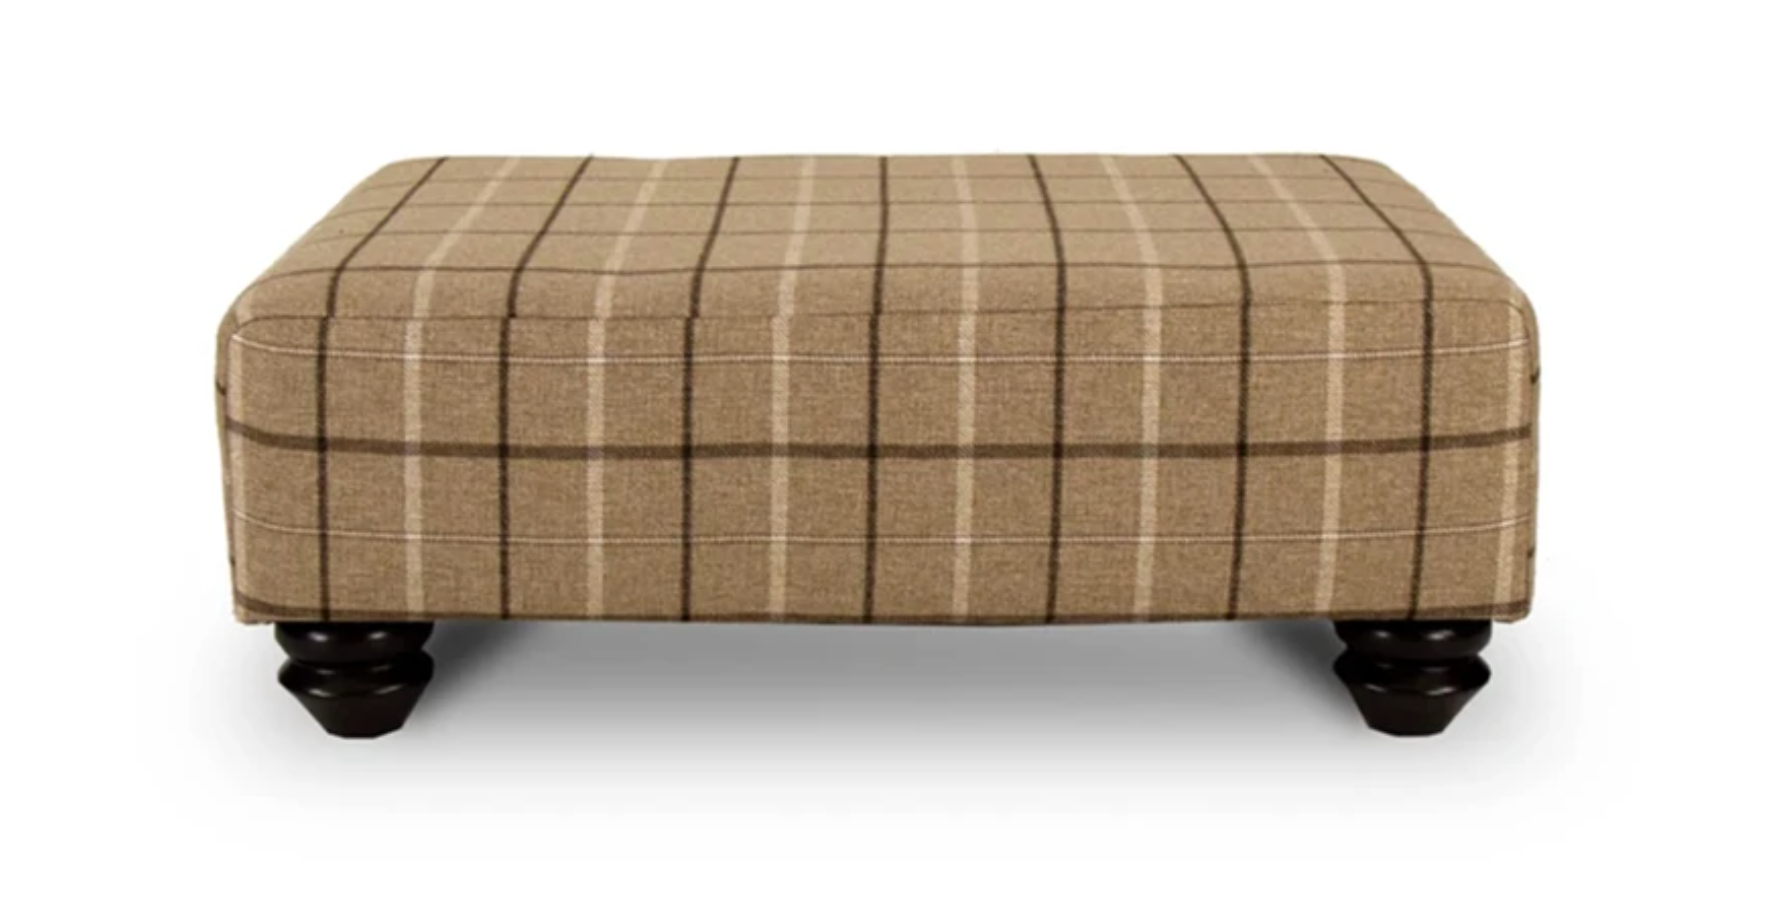 Spencer Footstool - Oat Collection